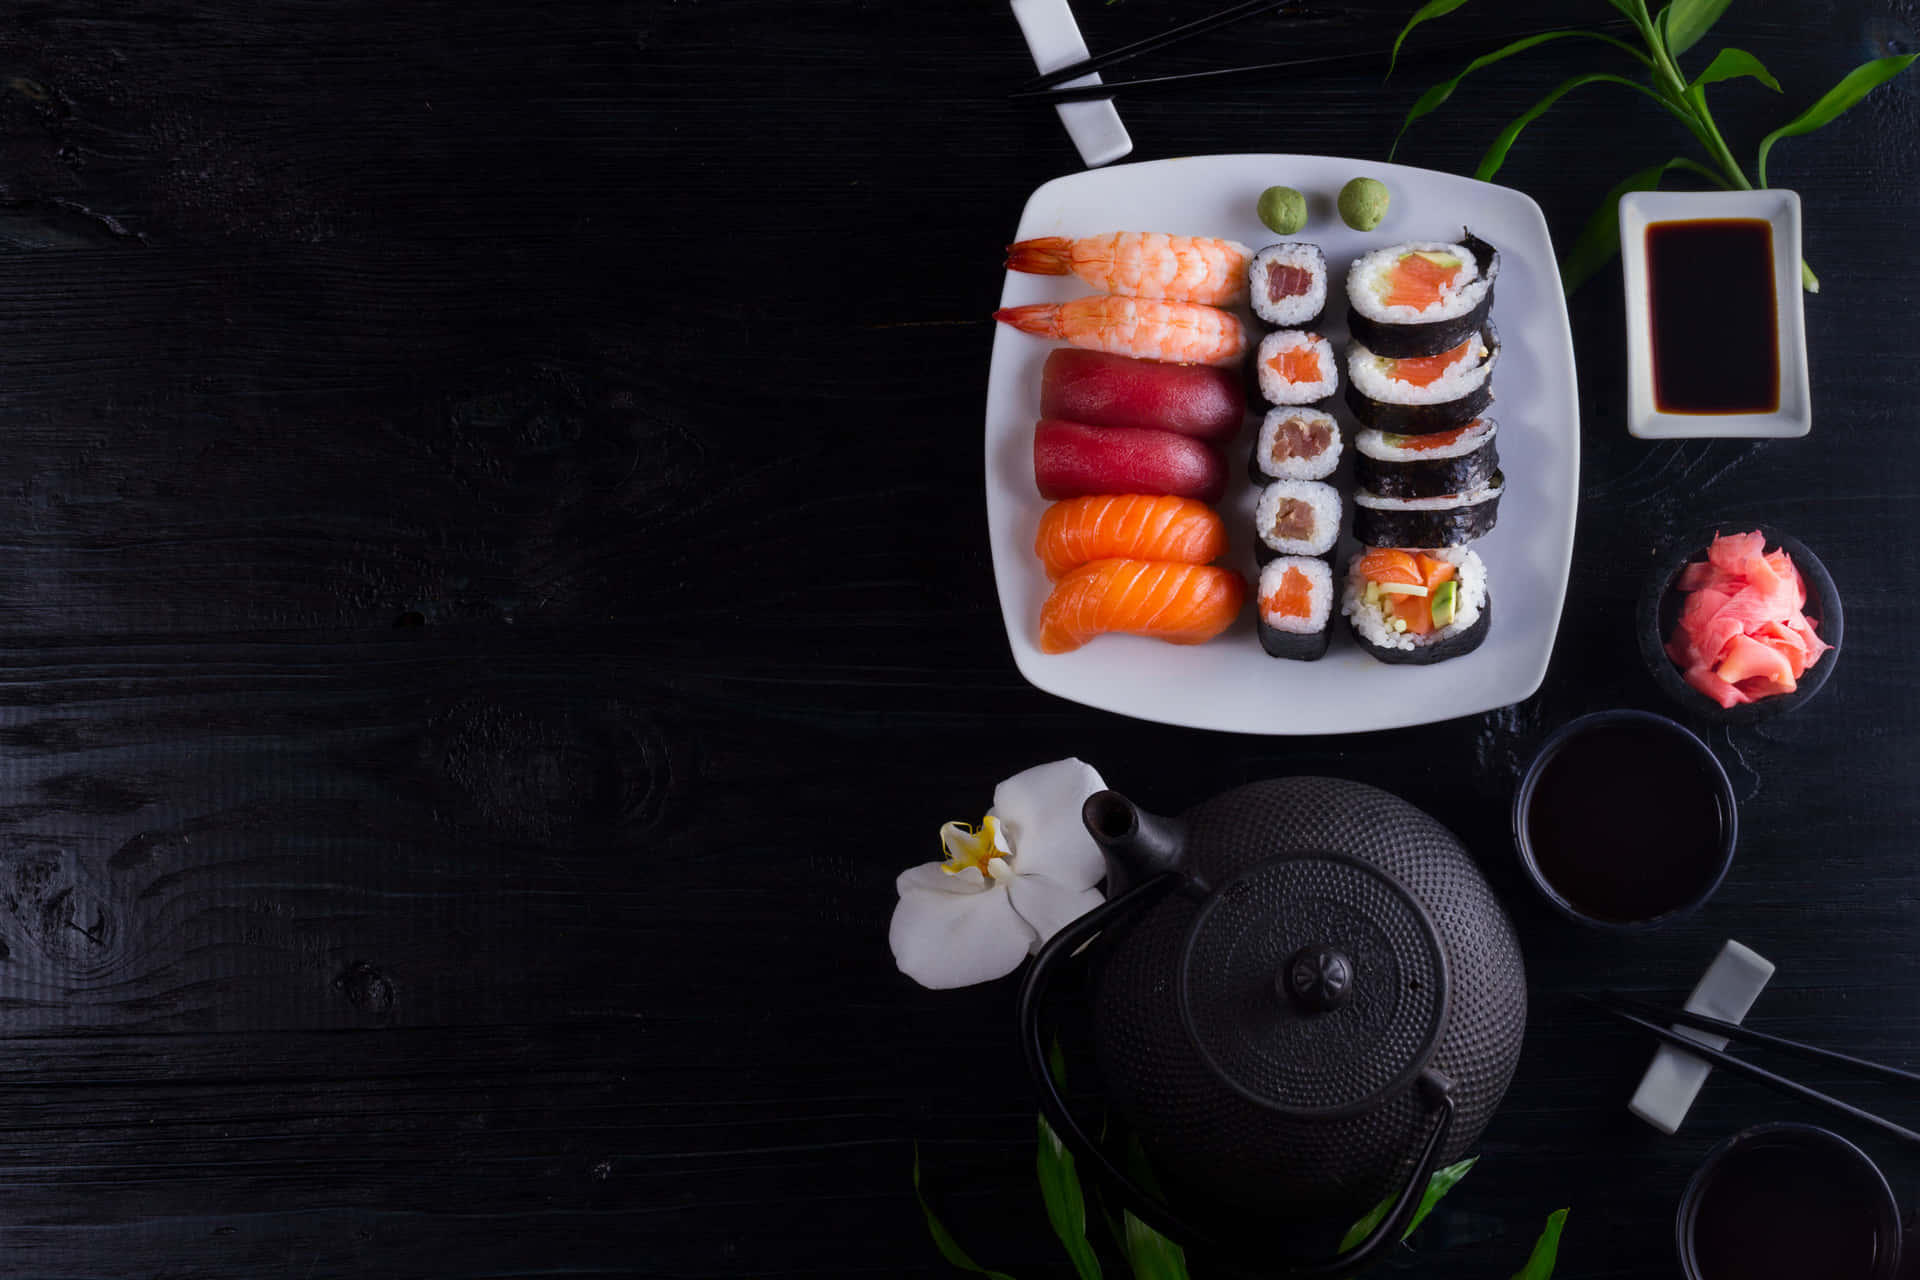 Expertly crafted sushi rolls on an elegant dish